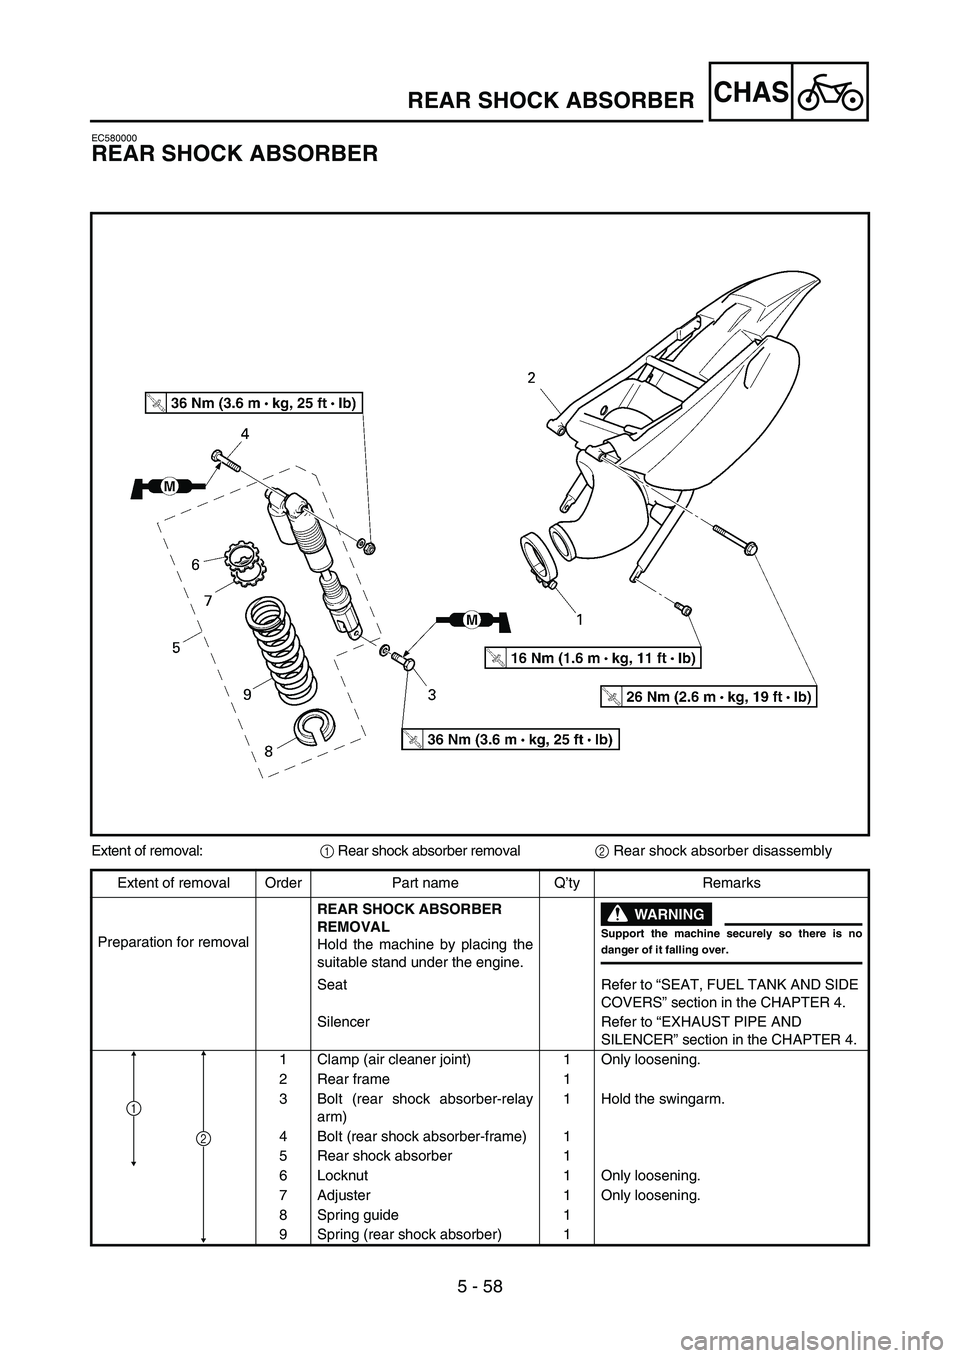 YAMAHA YZ85 2006  Owners Manual 5 - 58
CHASREAR SHOCK ABSORBER
EC580000
REAR SHOCK ABSORBER
5PA51870
Extent of removal:
1 Rear shock absorber removal
2 Rear shock absorber disassembly
Extent of removal Order Part name Q’ty Remarks